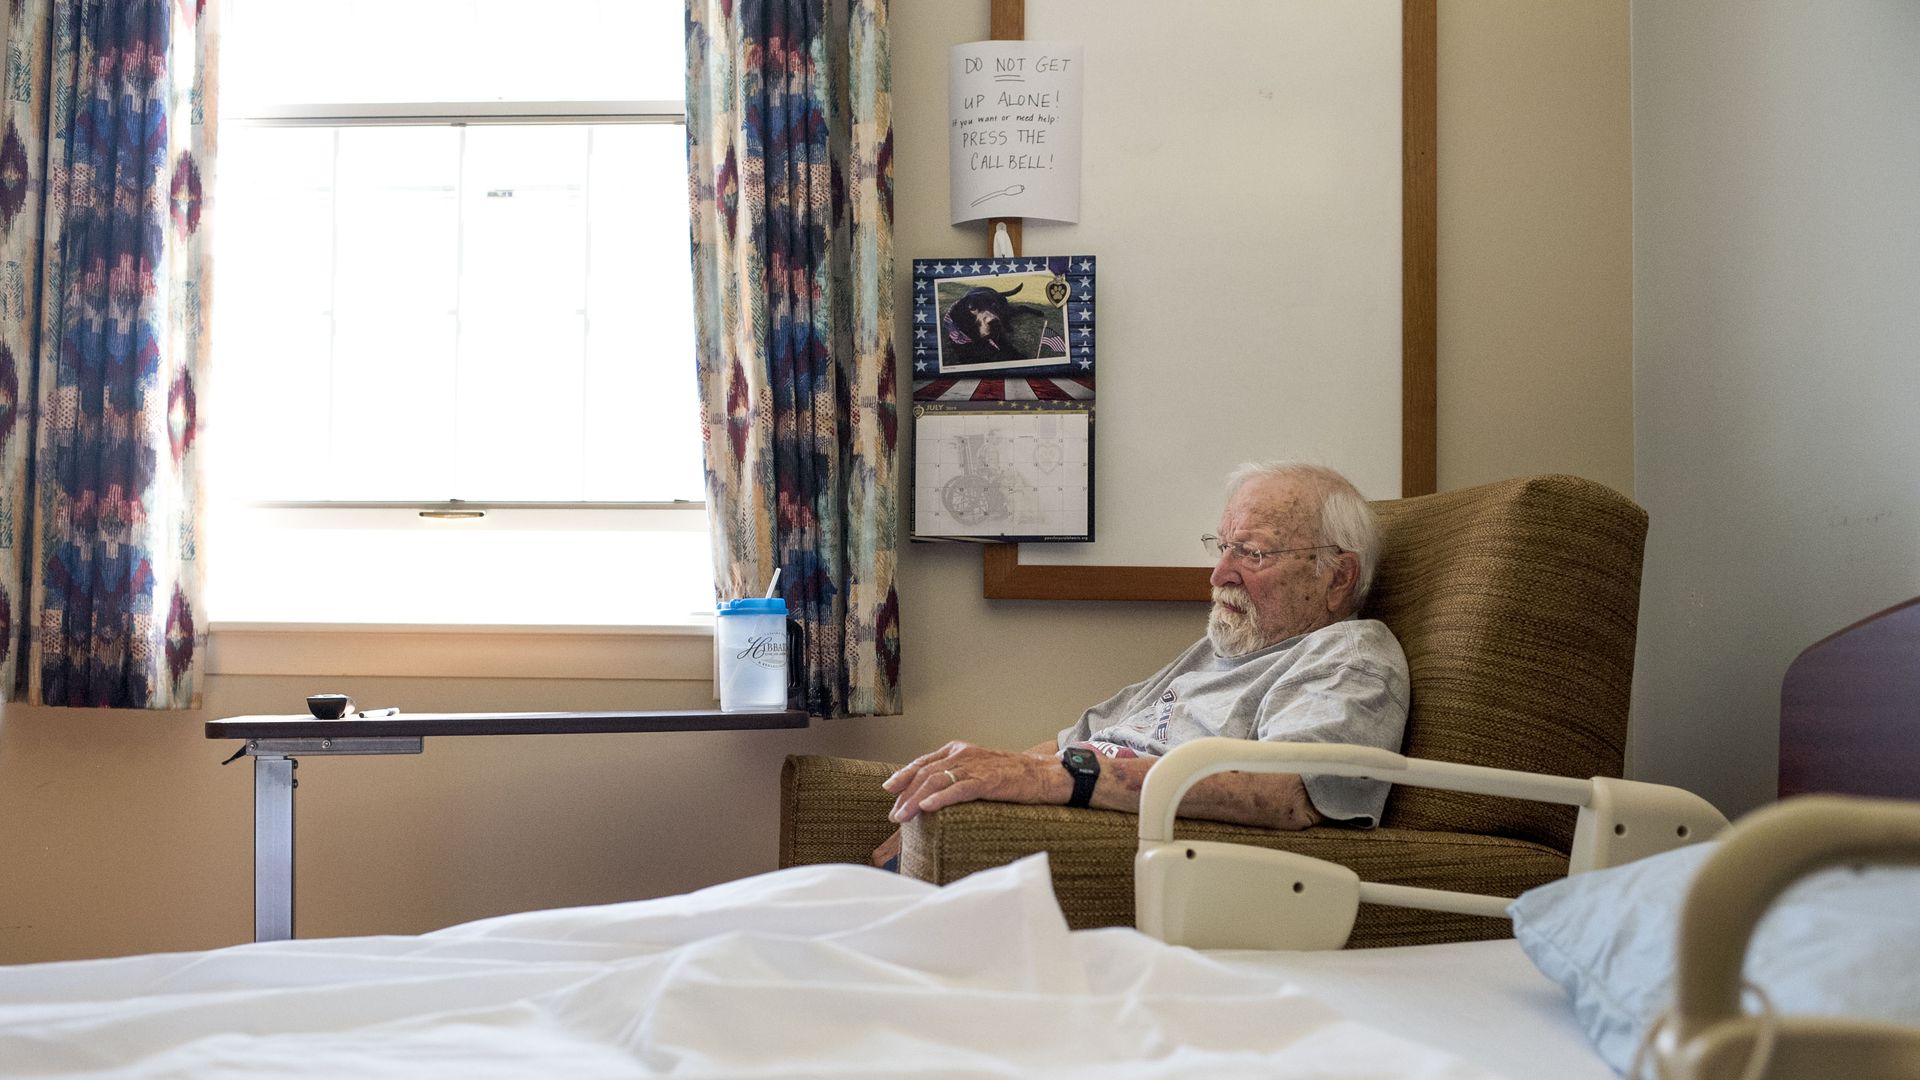 In this image, a man sits in an armchair in a nursing home room, near an open window that is brightly lit, and his bed.